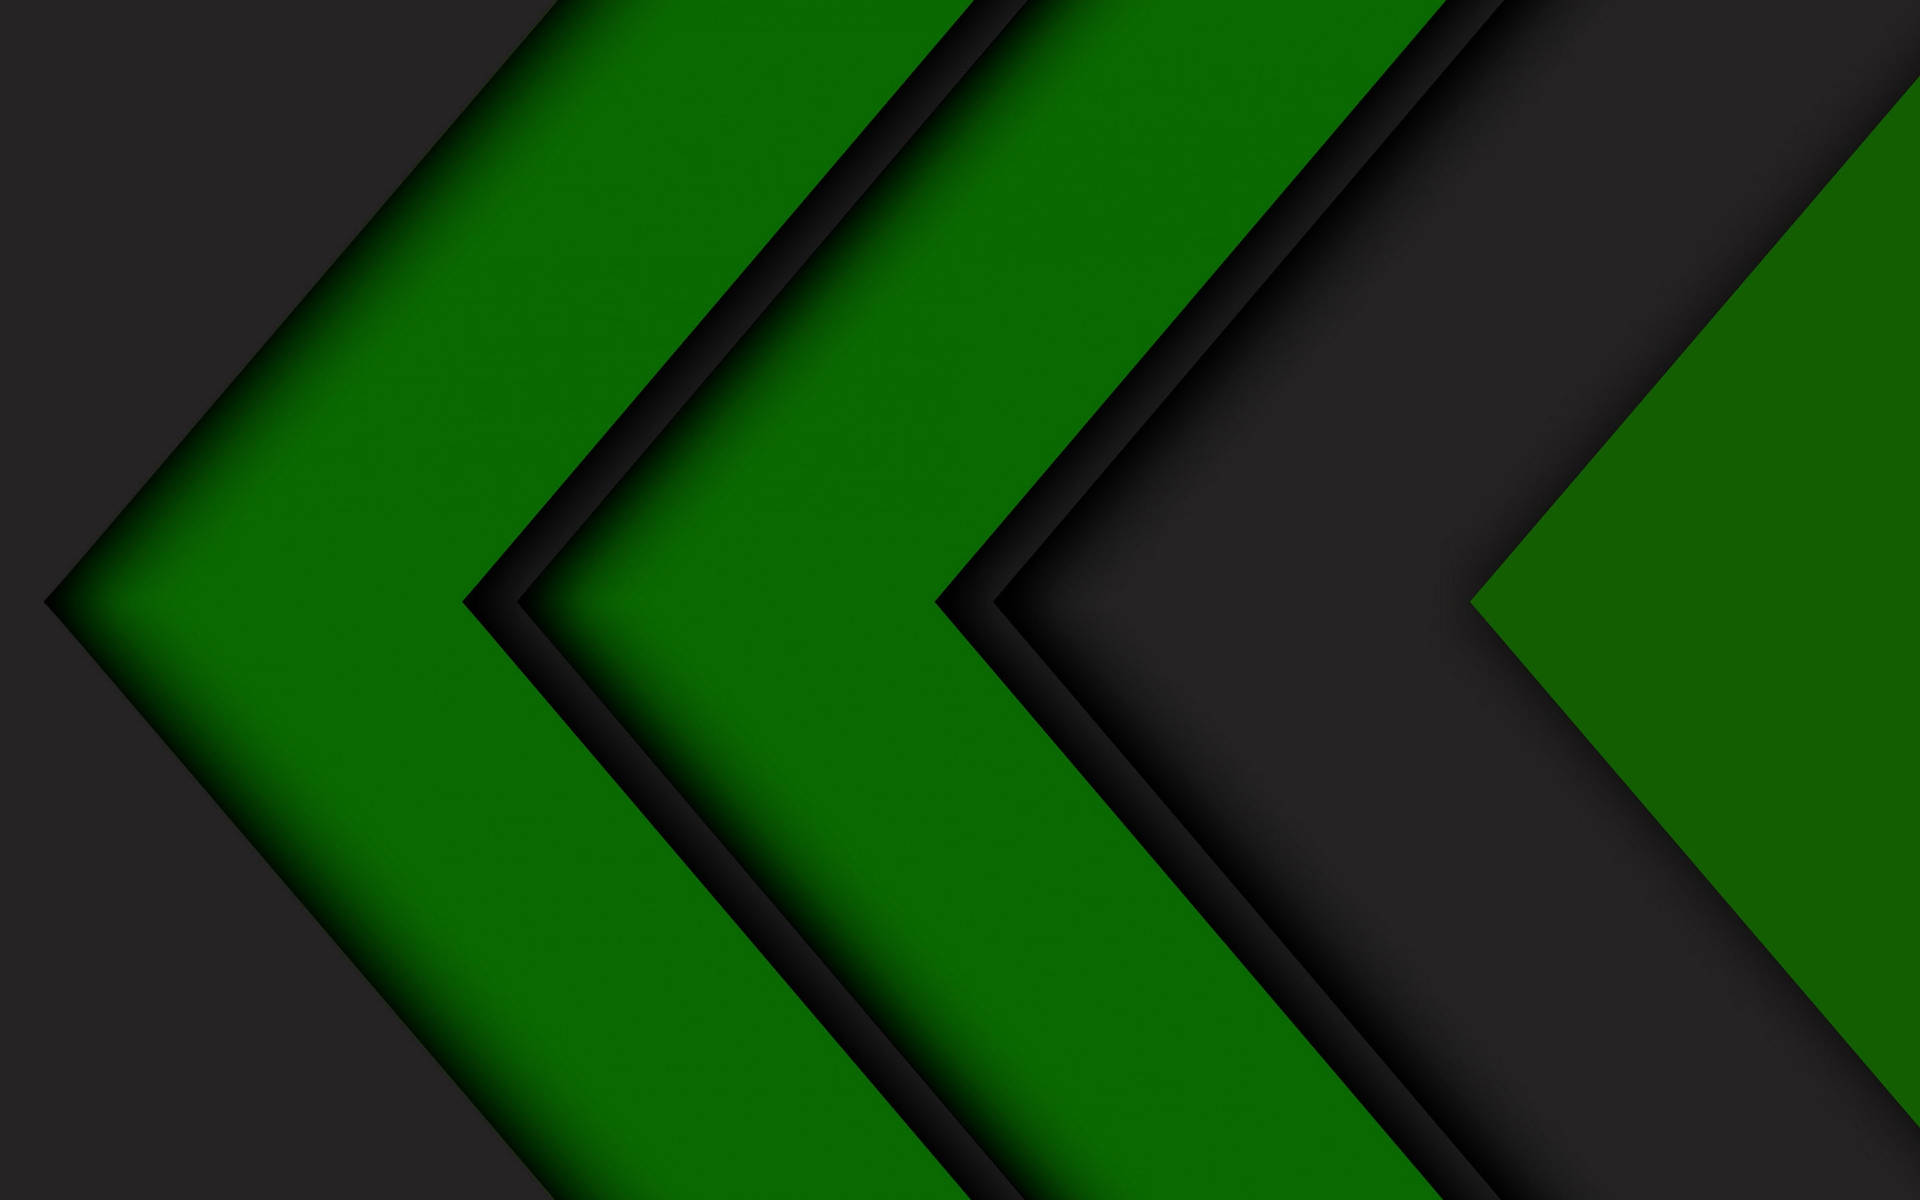 Black And Green Chevrons Background